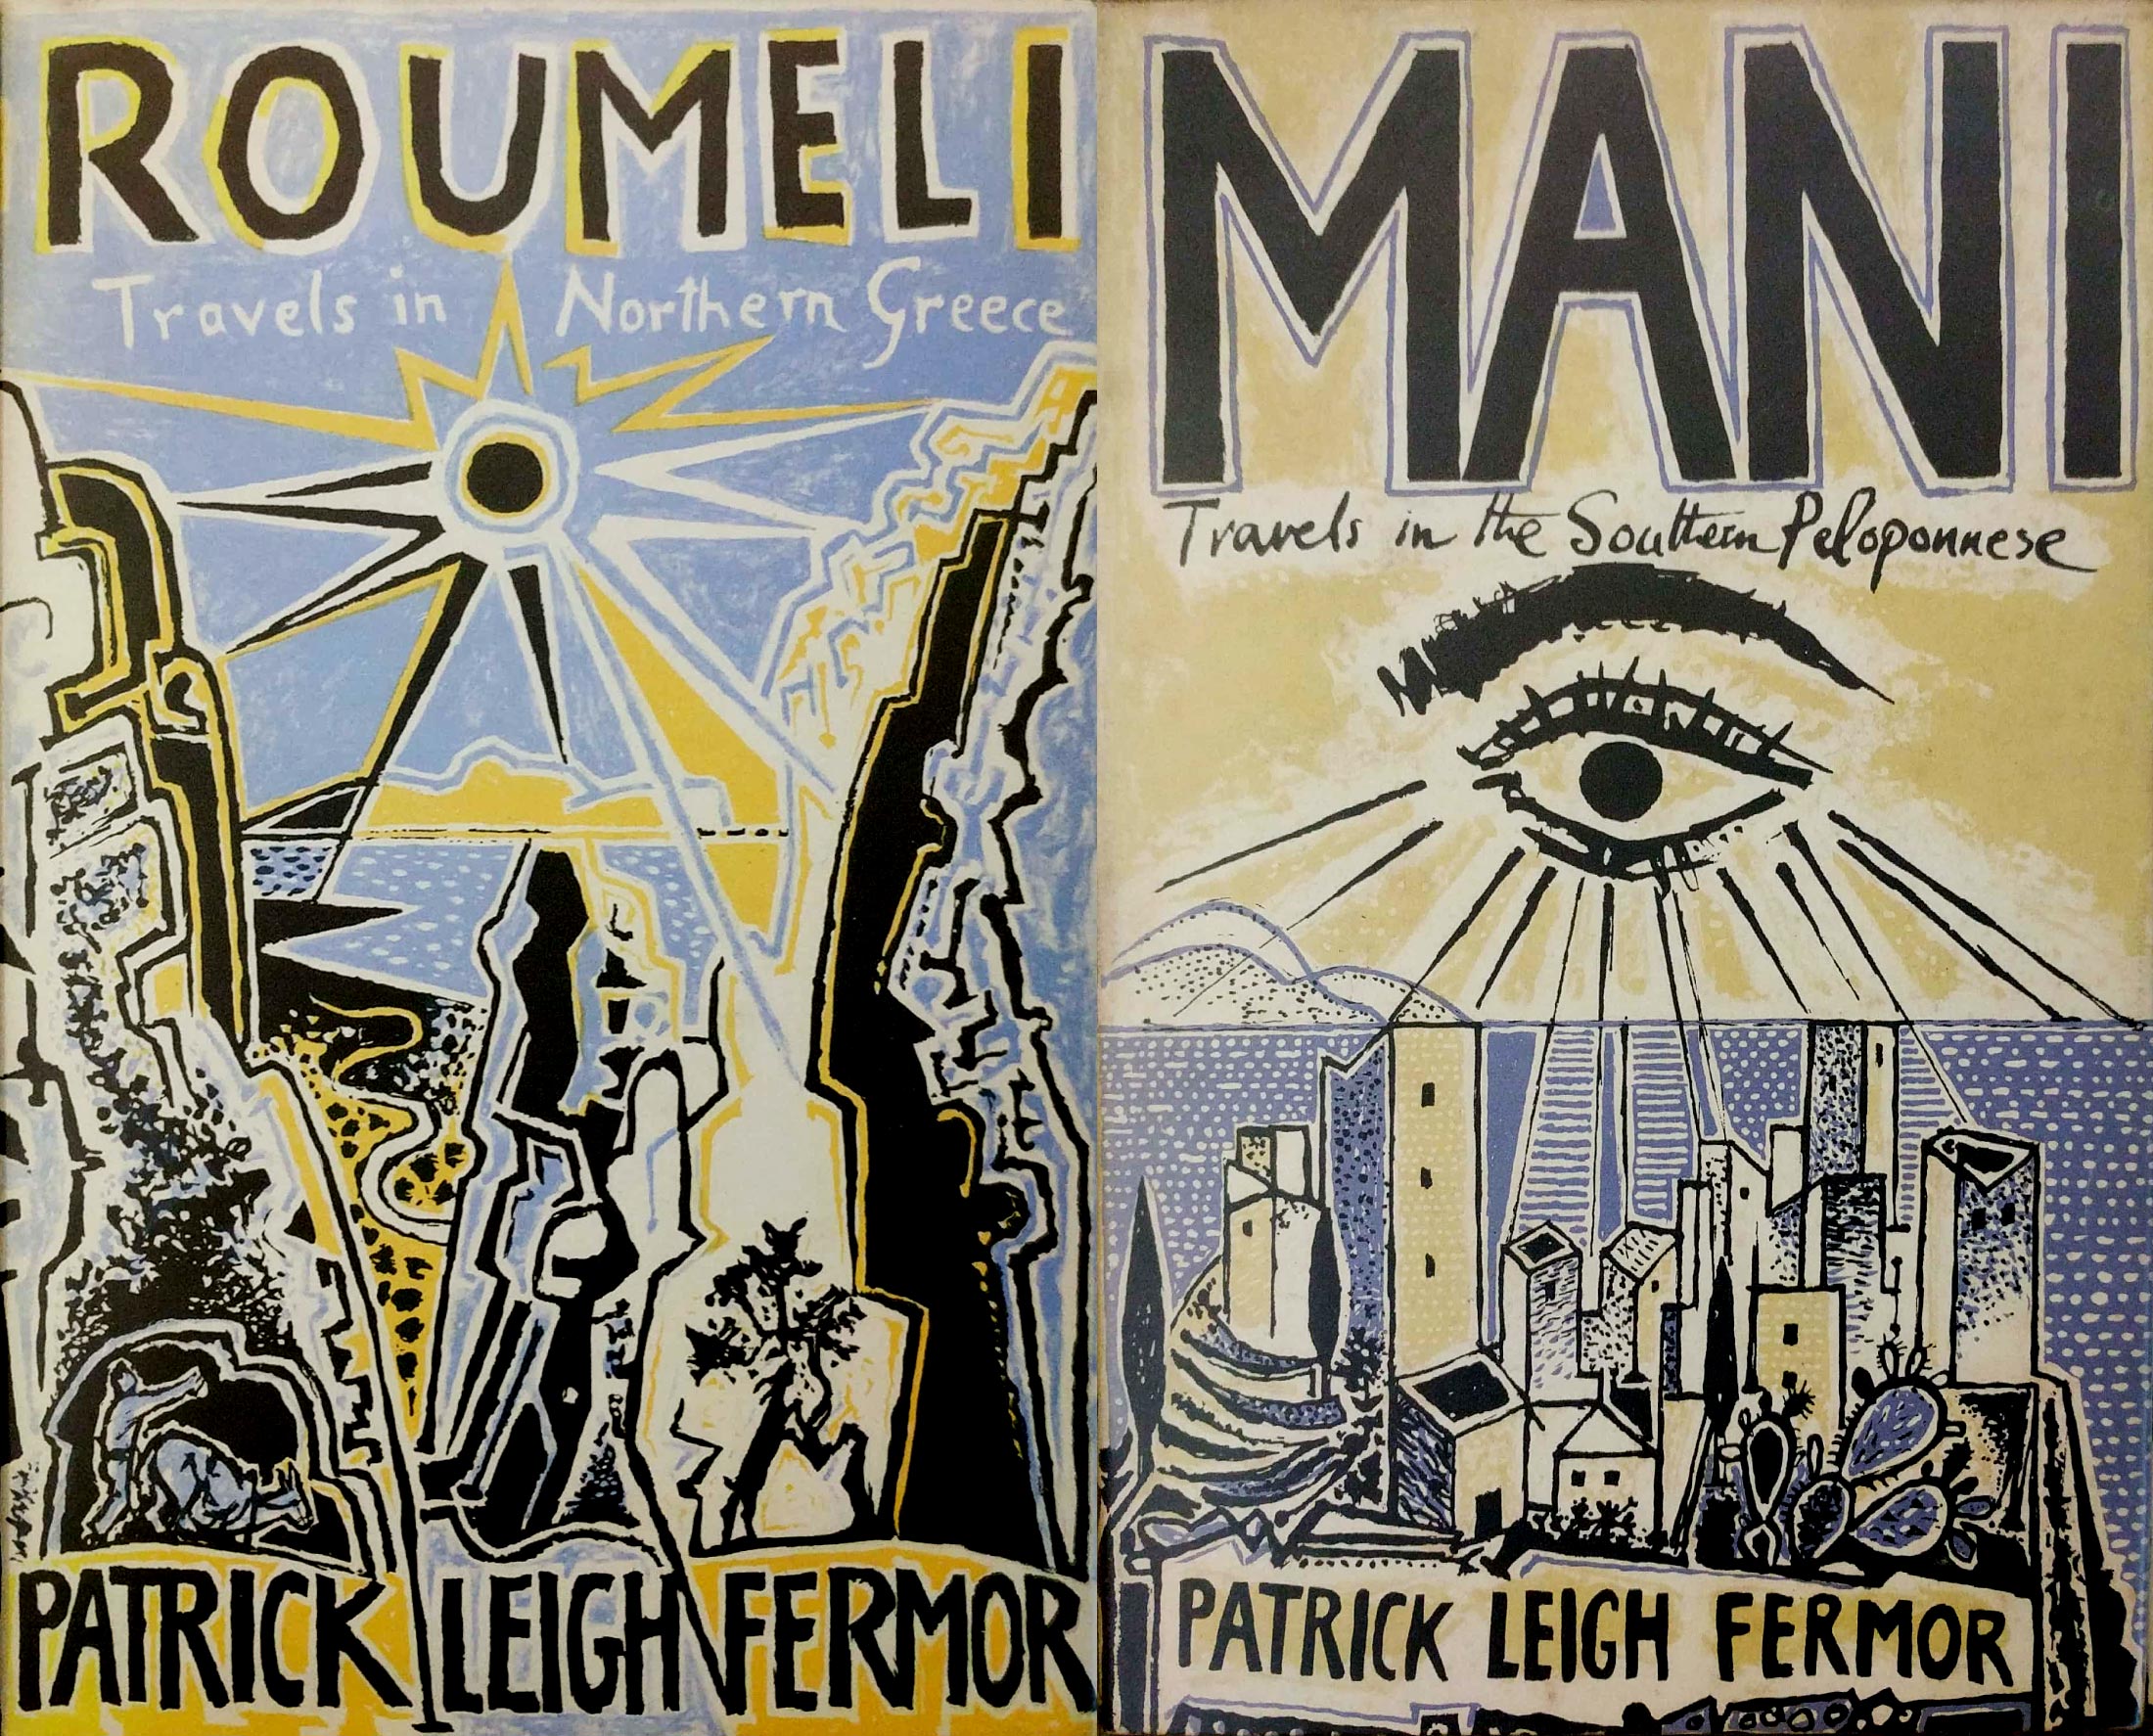 Mani and Roumeli by Leigh Fermor, Patrick